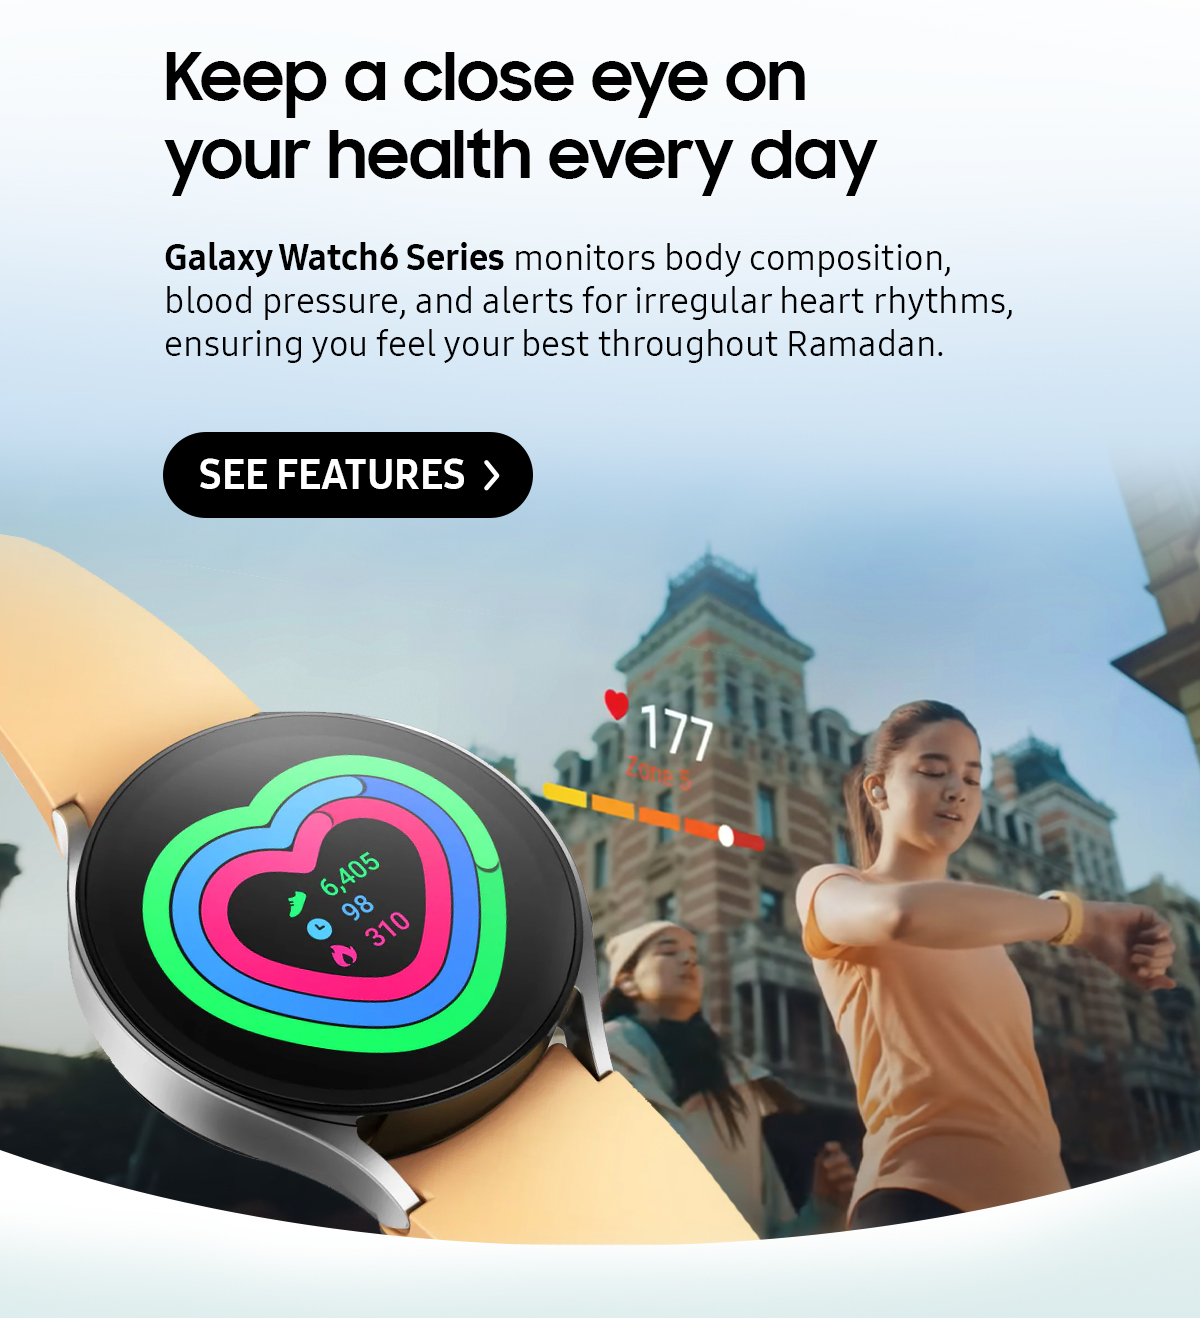 Keep a close eye on your health every day | Galaxy Watch6 Series monitors body composition, blood pressure, and alerts for irregular heart rhythms, ensuring you feel your best throughout Ramadan. 